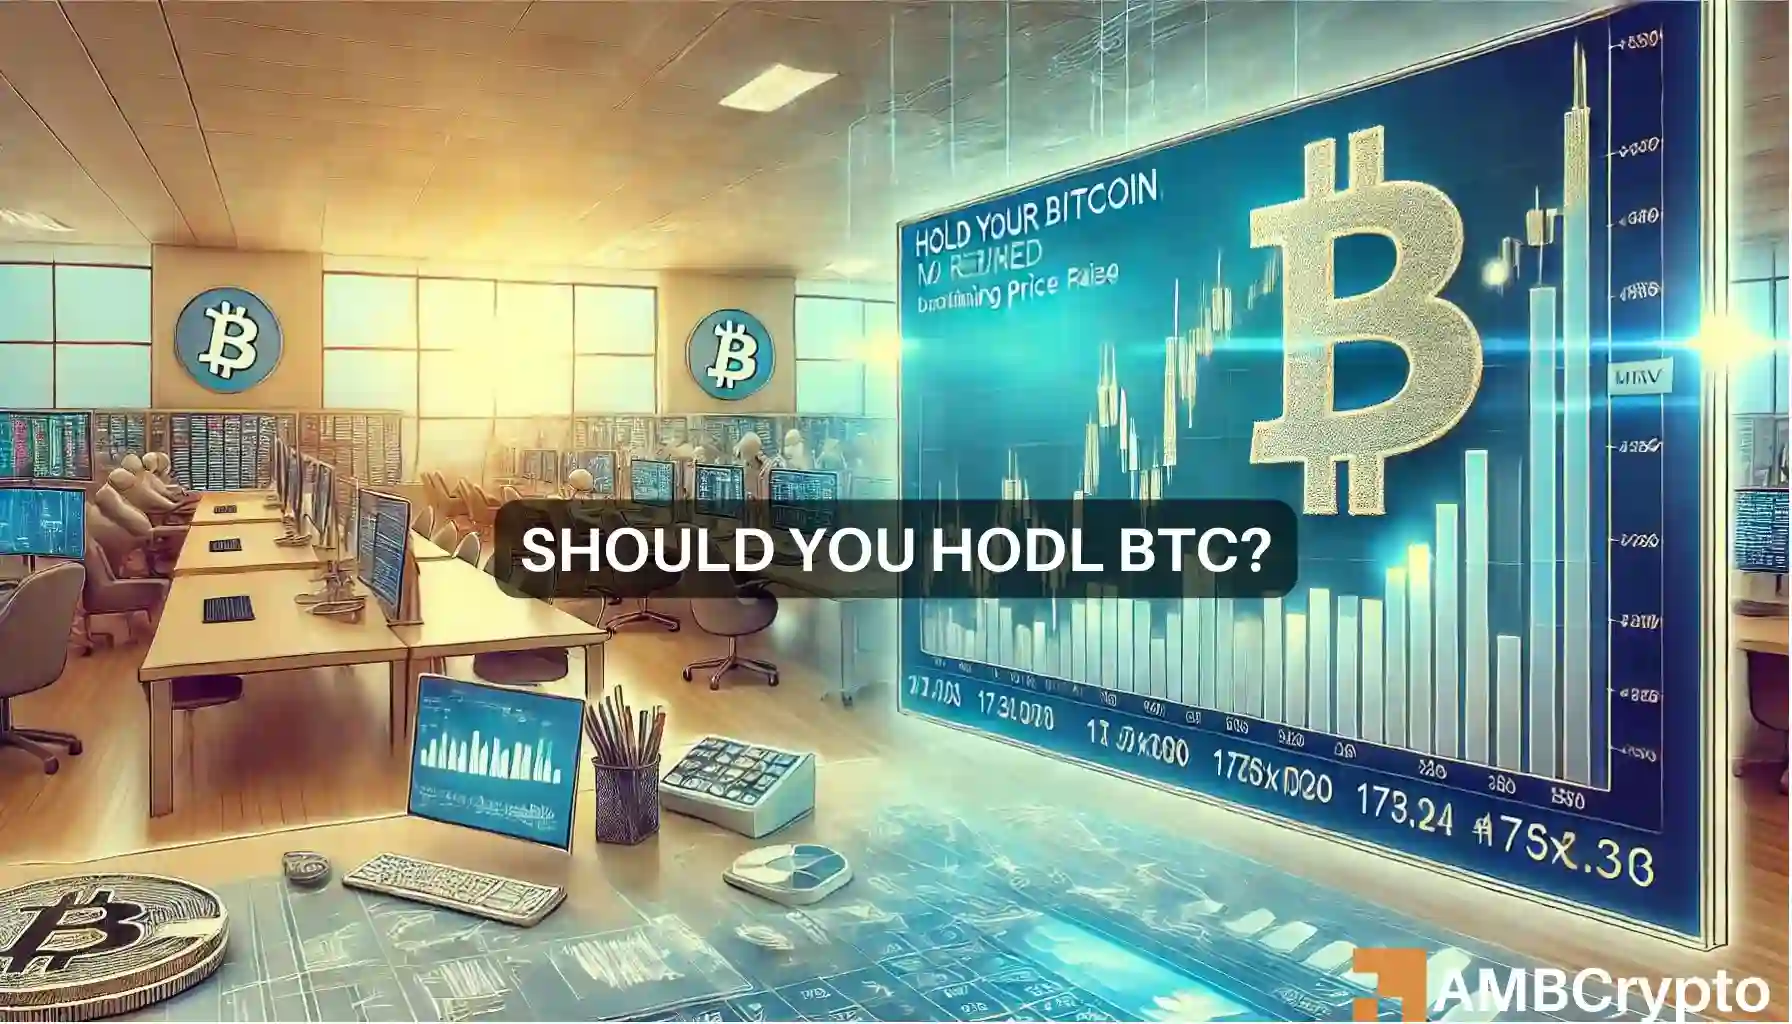 All the reasons why HODLing Bitcoin is the right call now